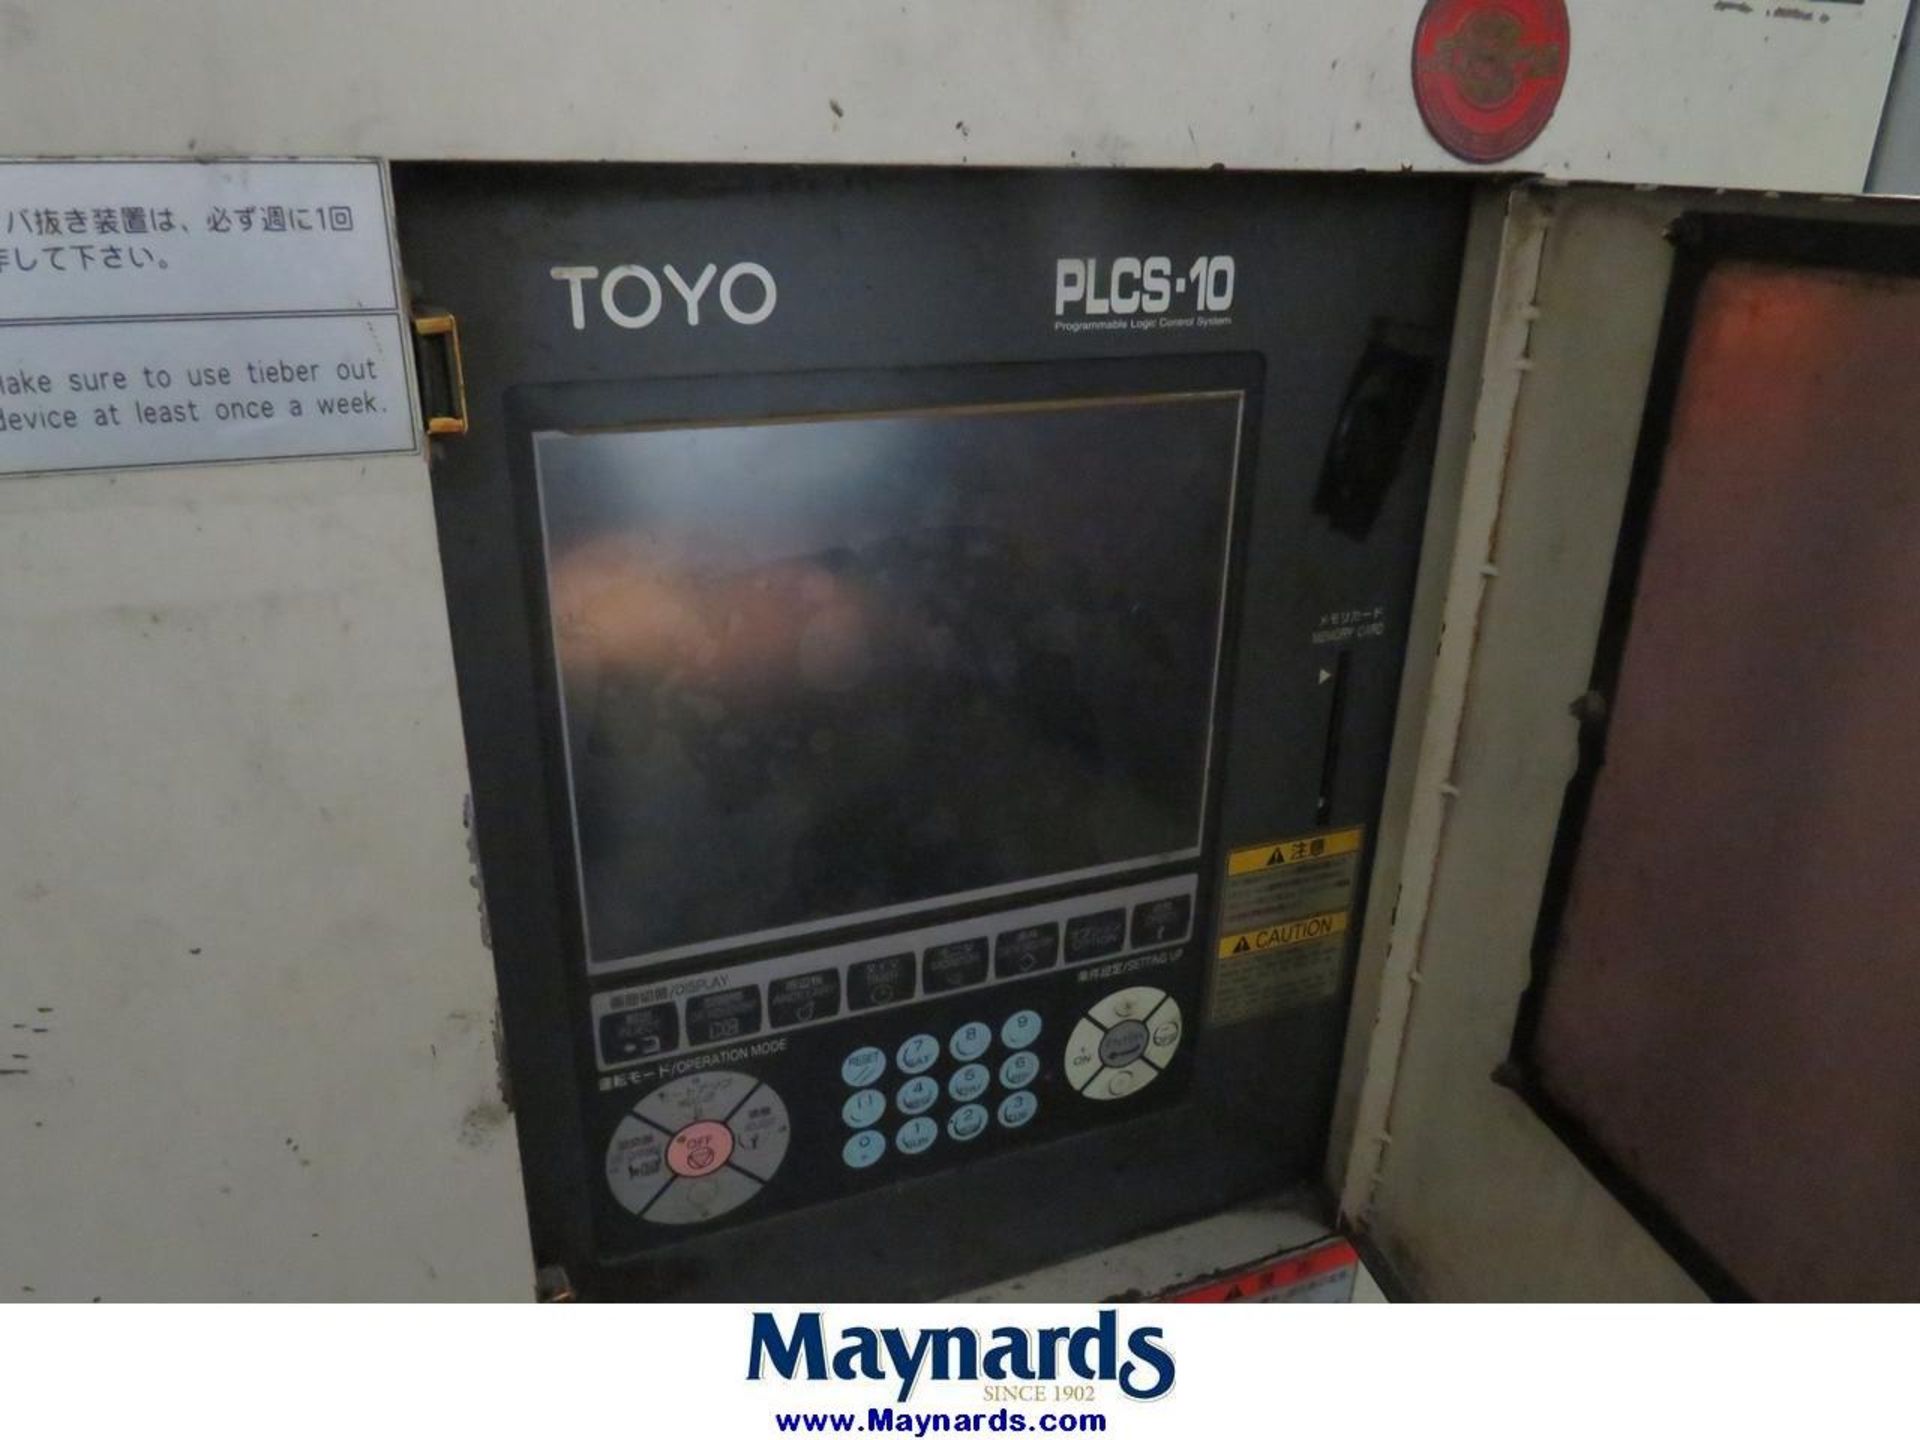 2006 Toyo BD-350V4-T 350 Ton Horizontal Cold Chamber Die Cast Press - Image 5 of 6